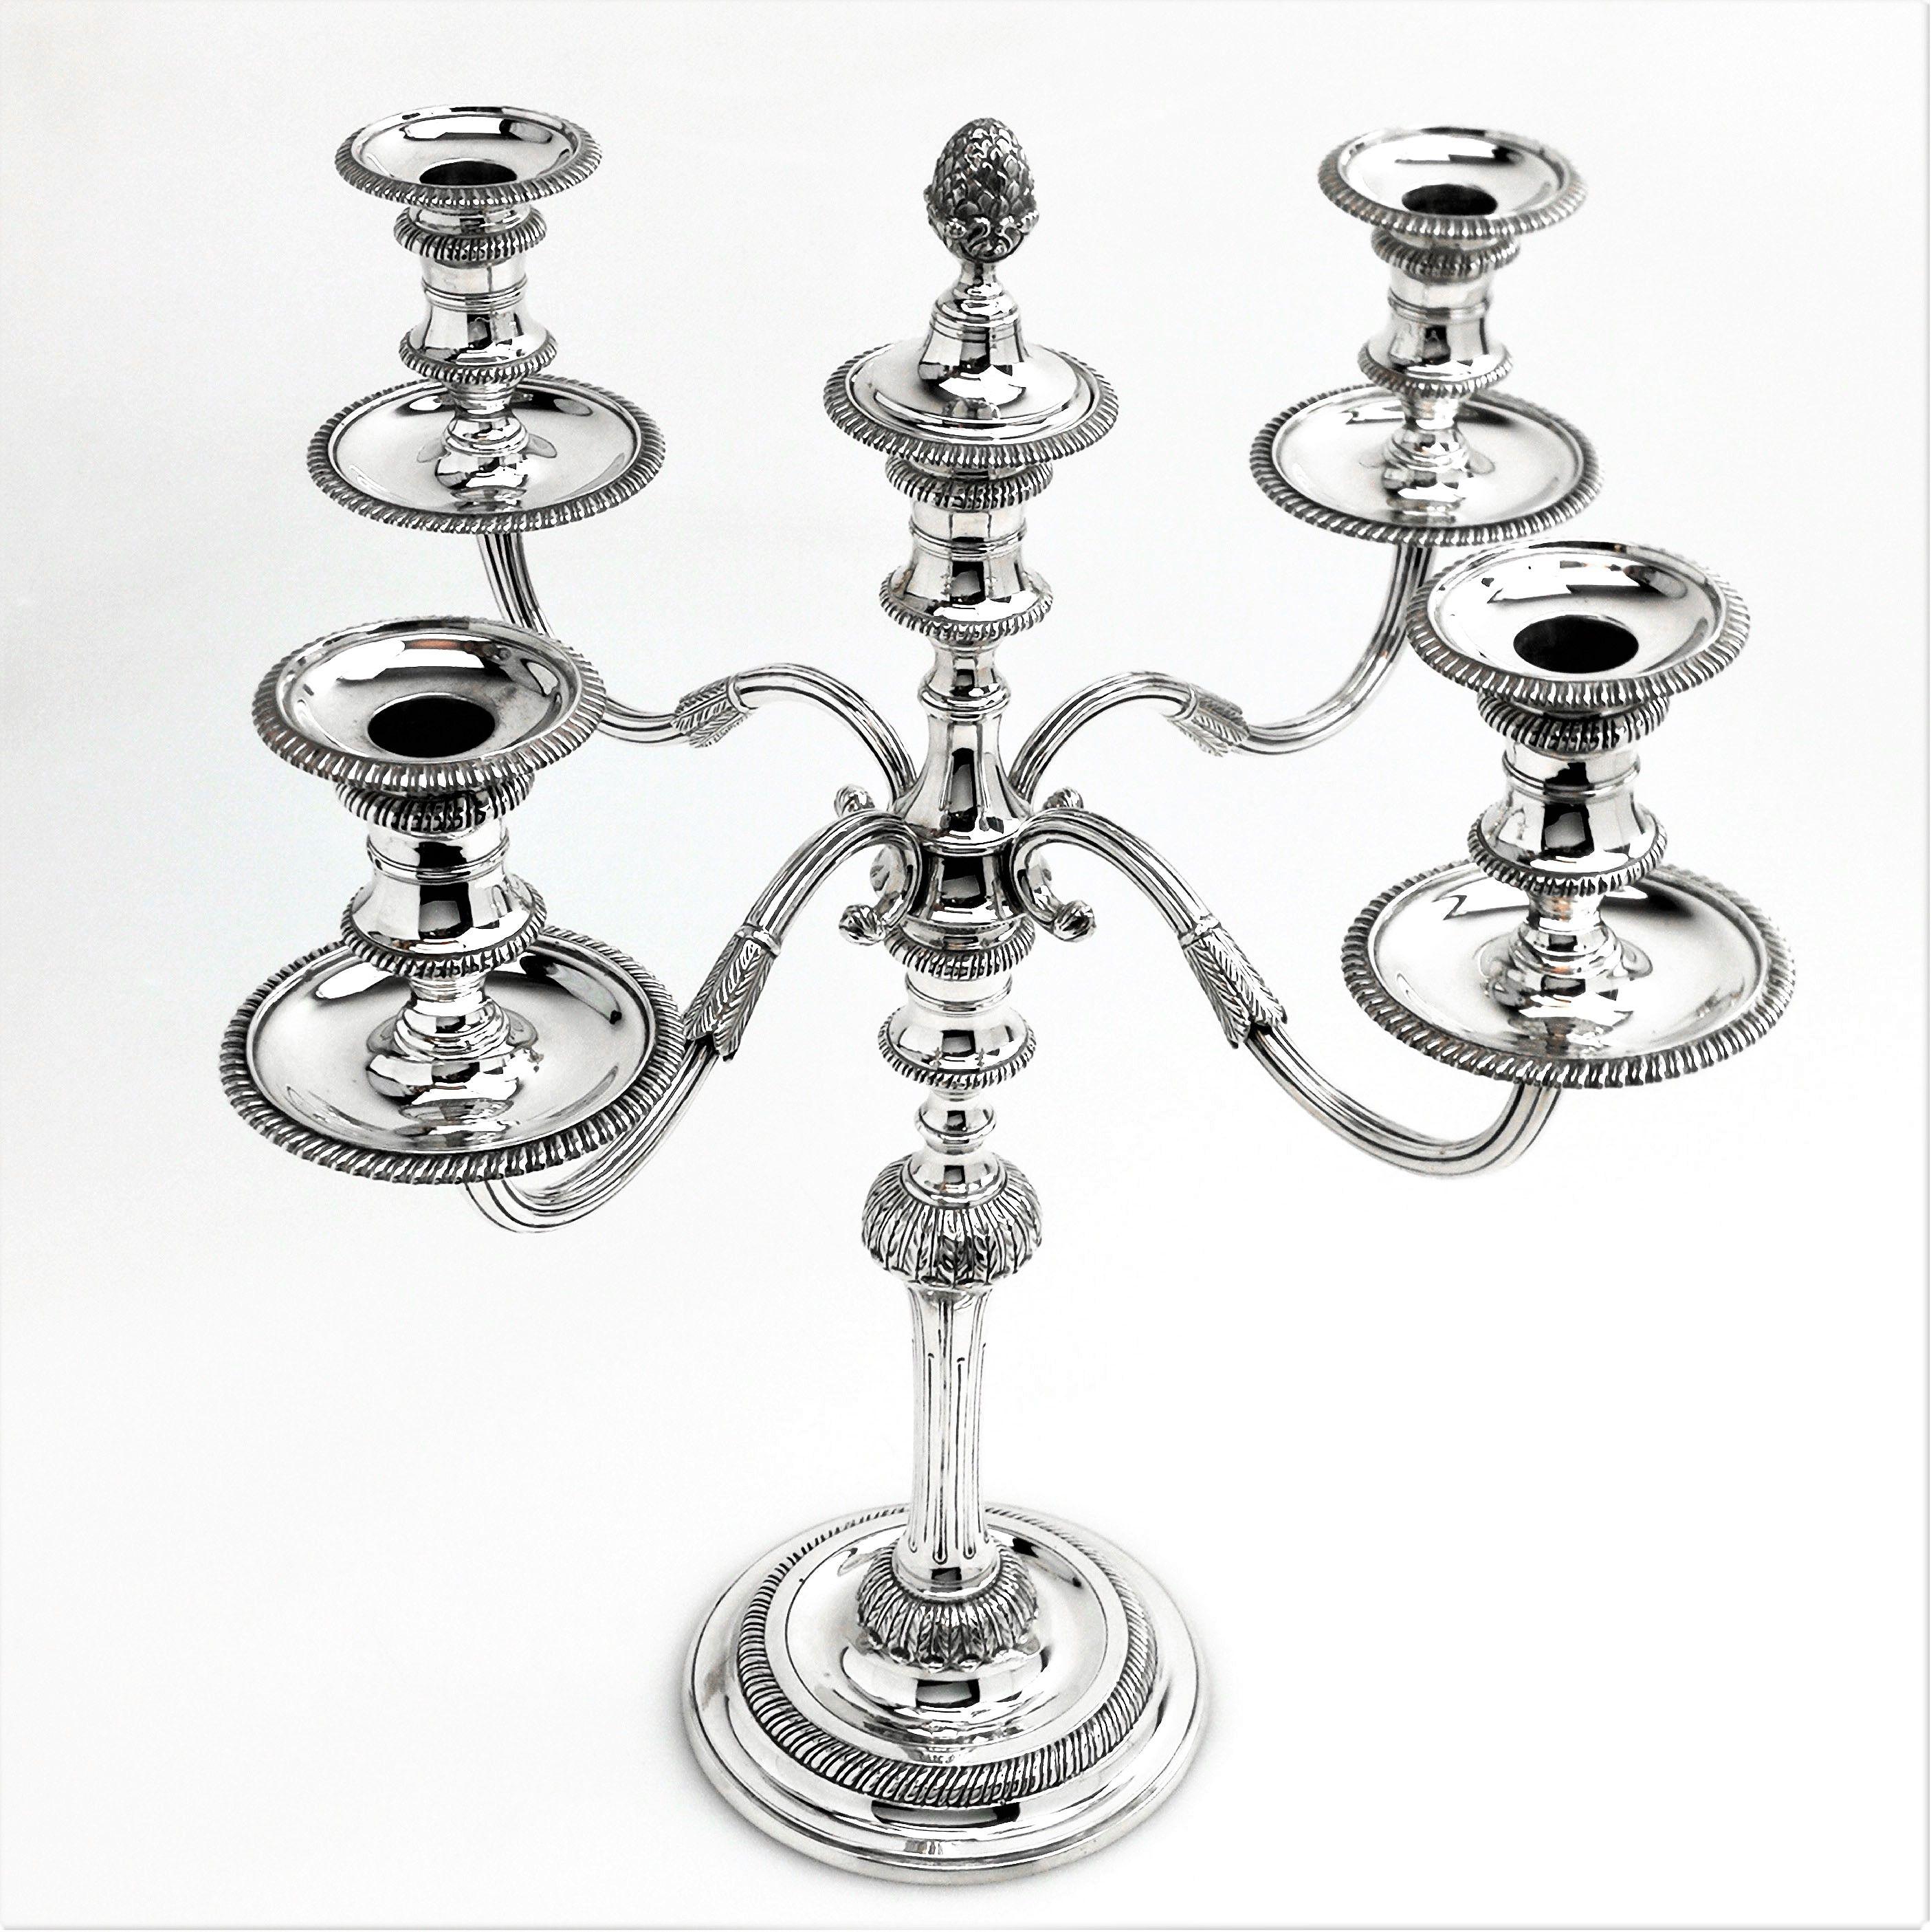 A vintage sterling silver 5-light Candelabra embellished with a traditional Gadroon pattern on the round spread foot and on the capitals and sconces. The Candelabra has a cast silver circular spread foot base and removable branches allowing it to be